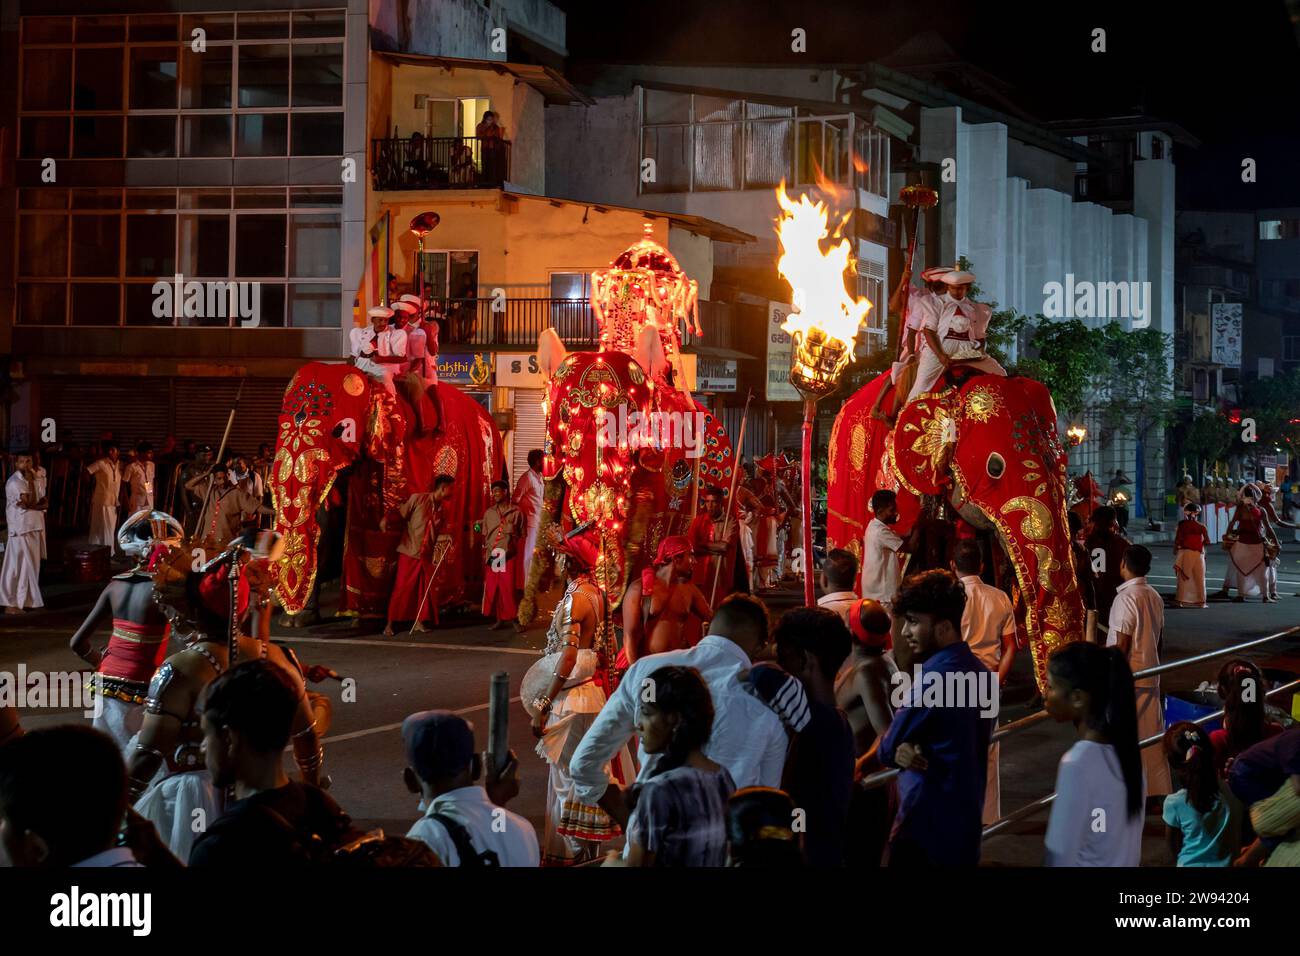 A group of three ceremonial elephants parade on a street at Kandy in Sri Lanka during the Esala Perahera or great procession. Stock Photo